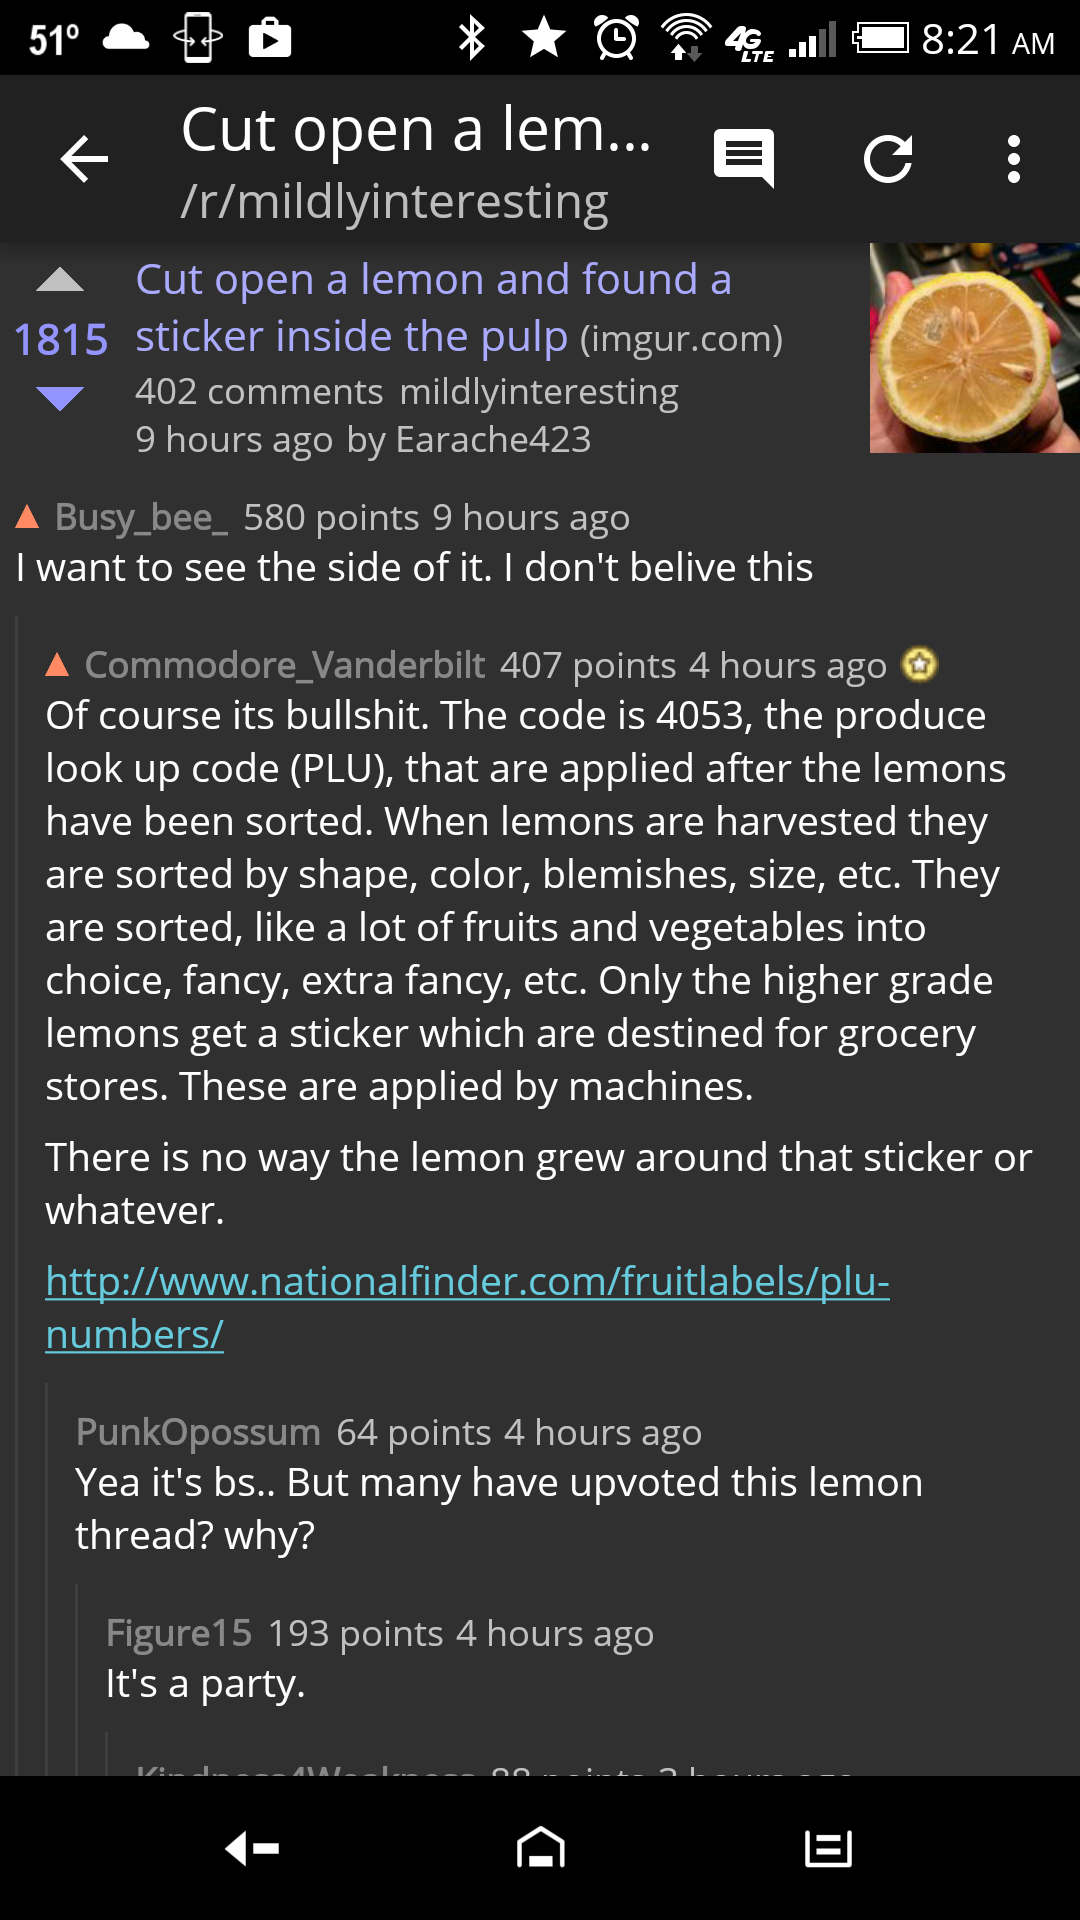 screenshot - c 51 40 @ 4. f cu Cut open a lem... E ' rmildlyinteresting Cut open a lemon and found a 1815 sticker inside the pulp imgur.com 402 mildlyinteresting 9 hours ago by Earache423 A Busy_bee_ 580 points 9 hours ago I want to see the side of it. I 